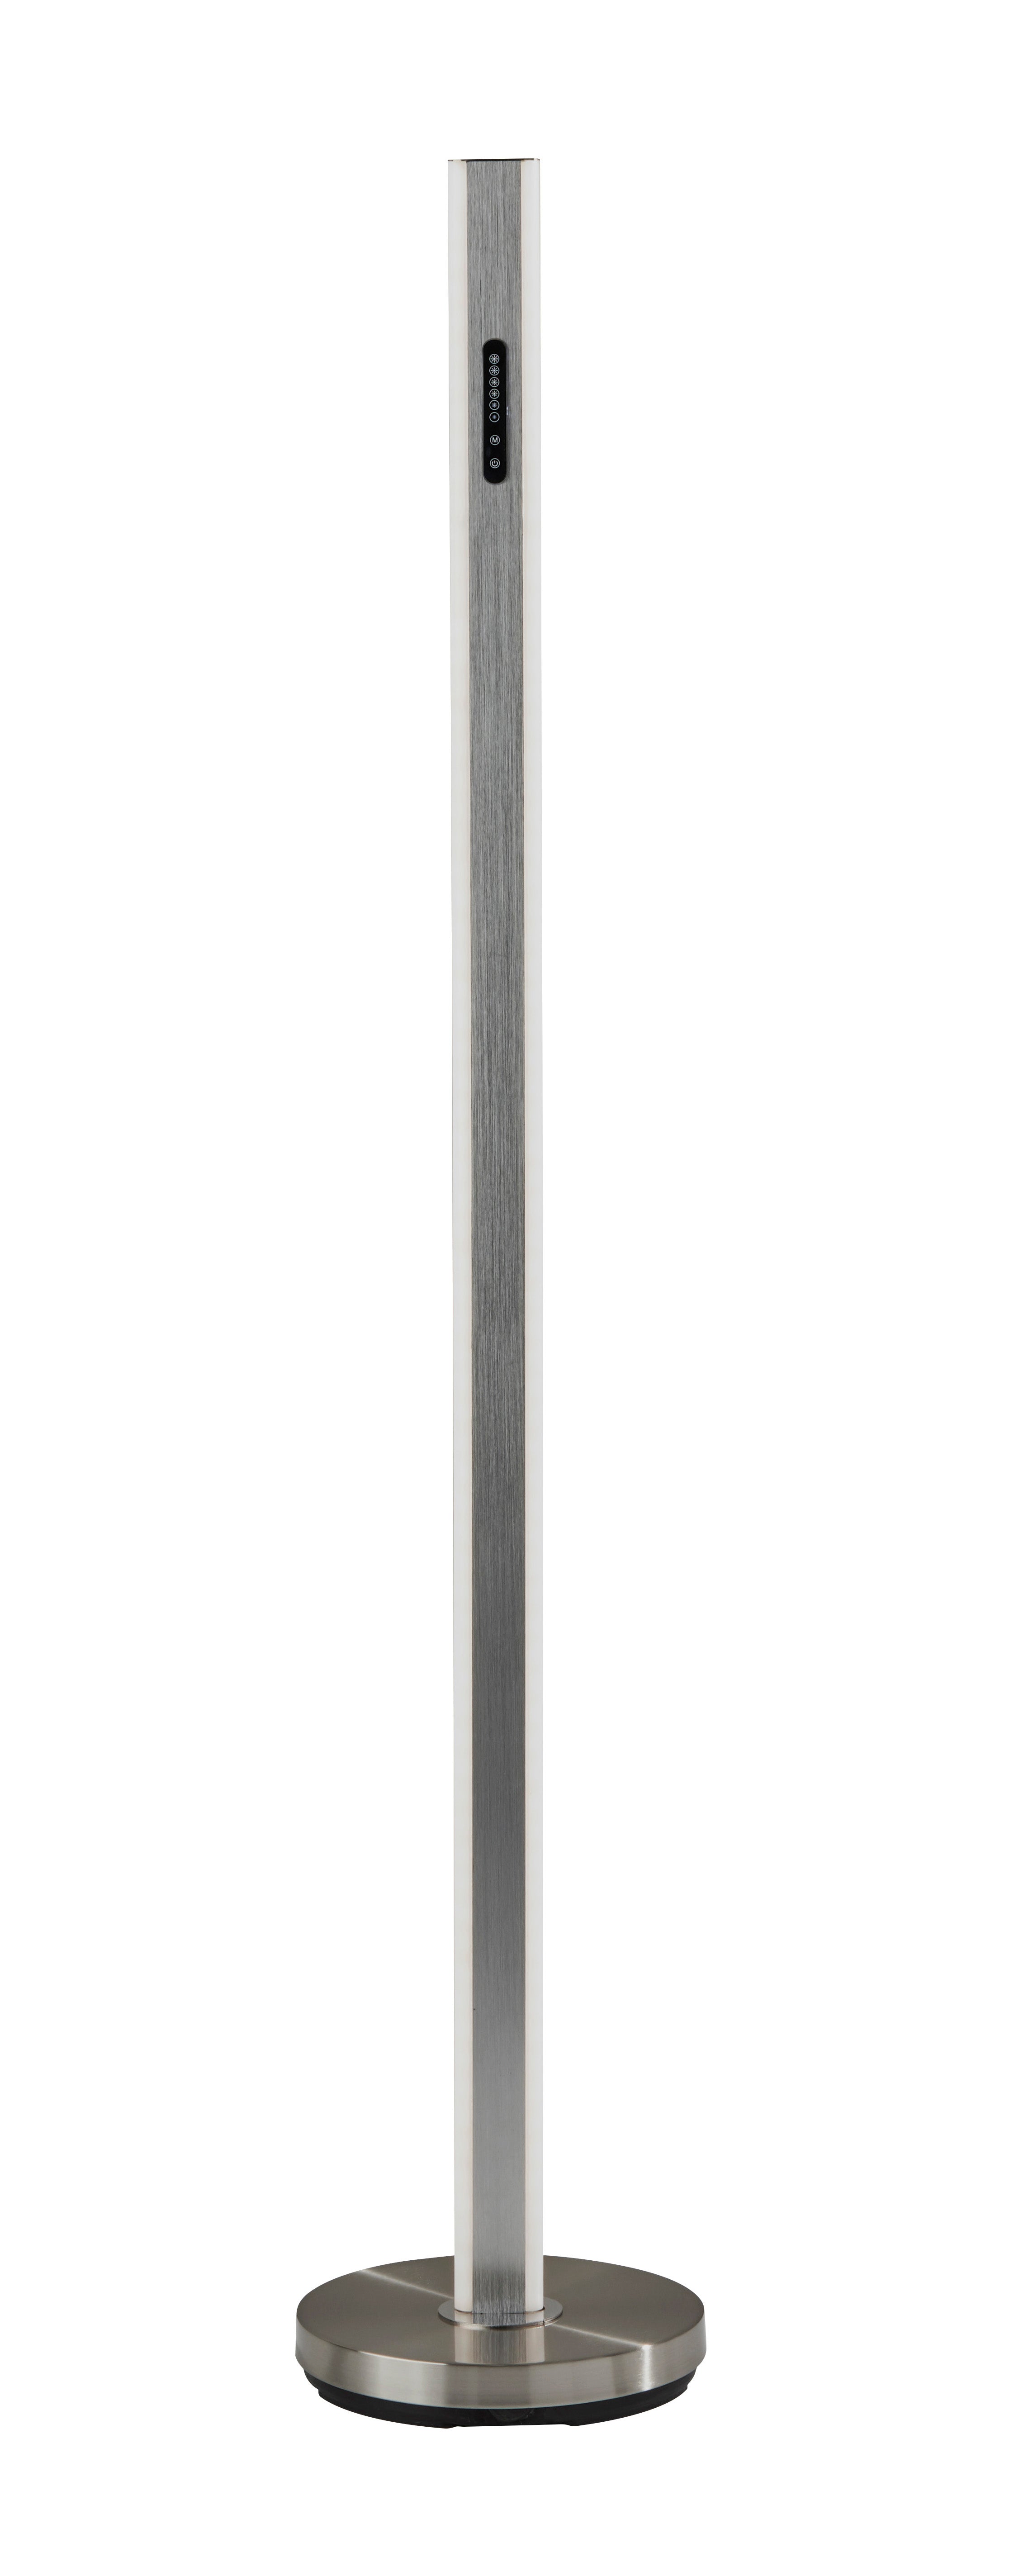 MARLA Floor lamp Stainless steel INTEGRATED LED - 2101-22 | ADESSO